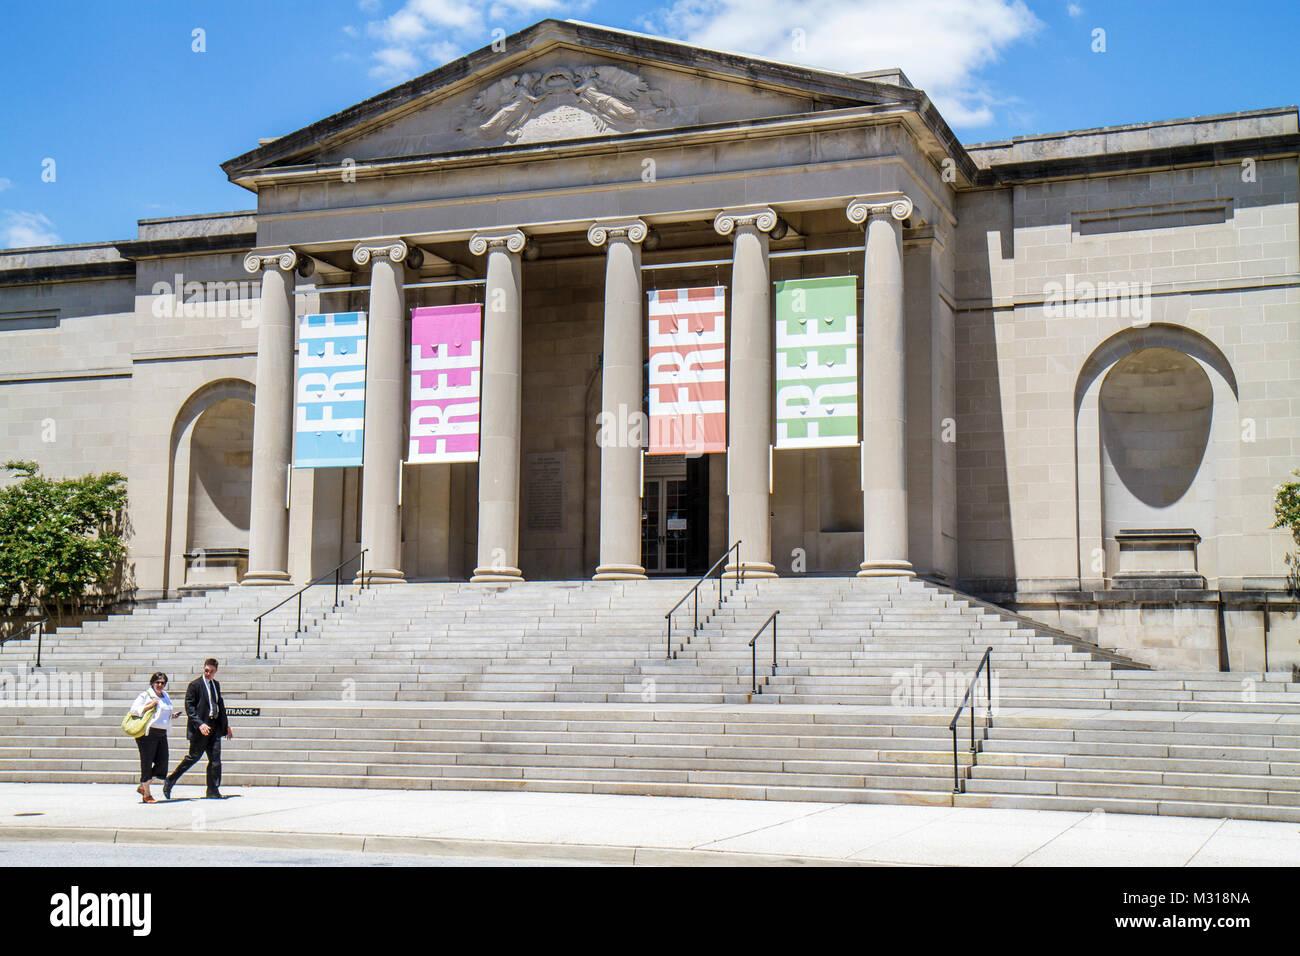 Baltimore Maryland,Wyman Park,Baltimore Museum of Art,Neoclassical architecture,banner,free admission,entrance,front,steps stairs staircase,column,ion Stock Photo